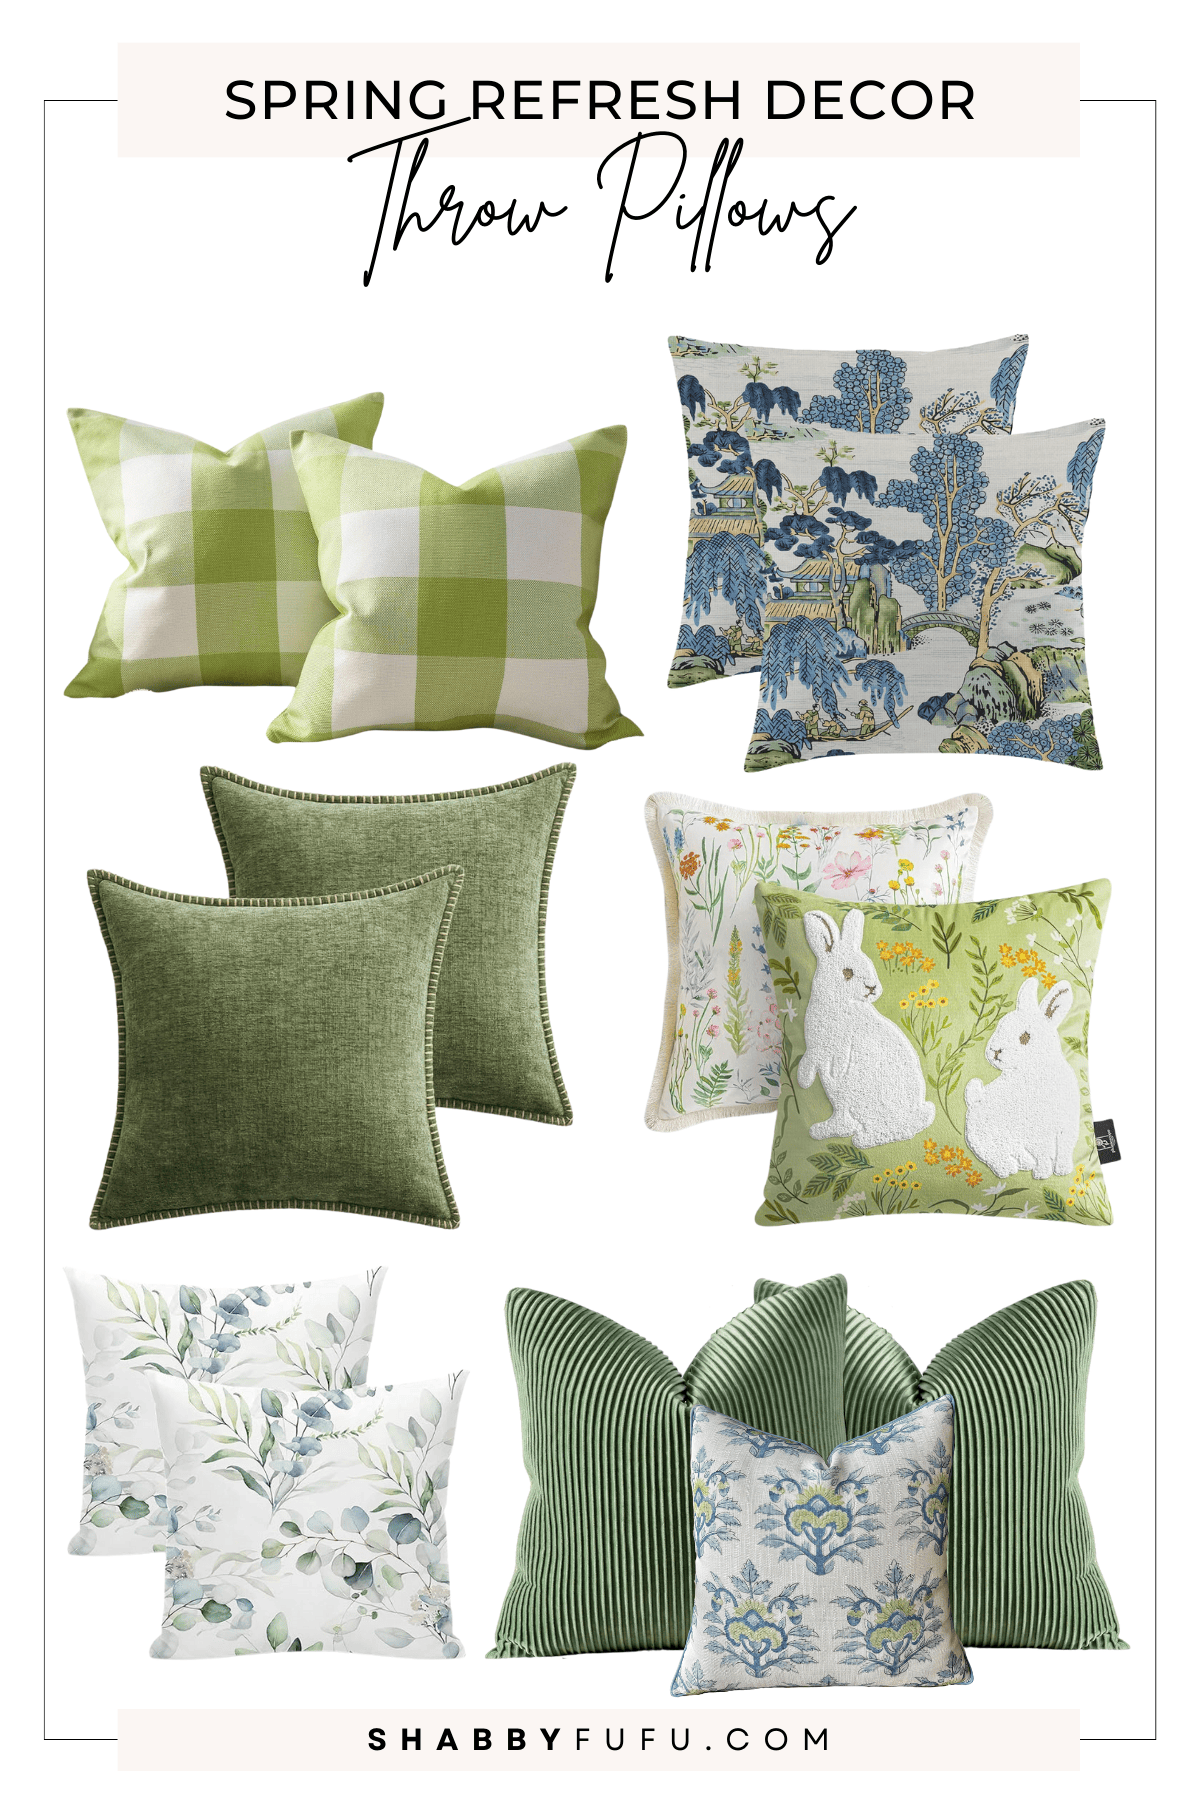 spring awekening pinterest decorative image featuring a collage of spring themed products for the home